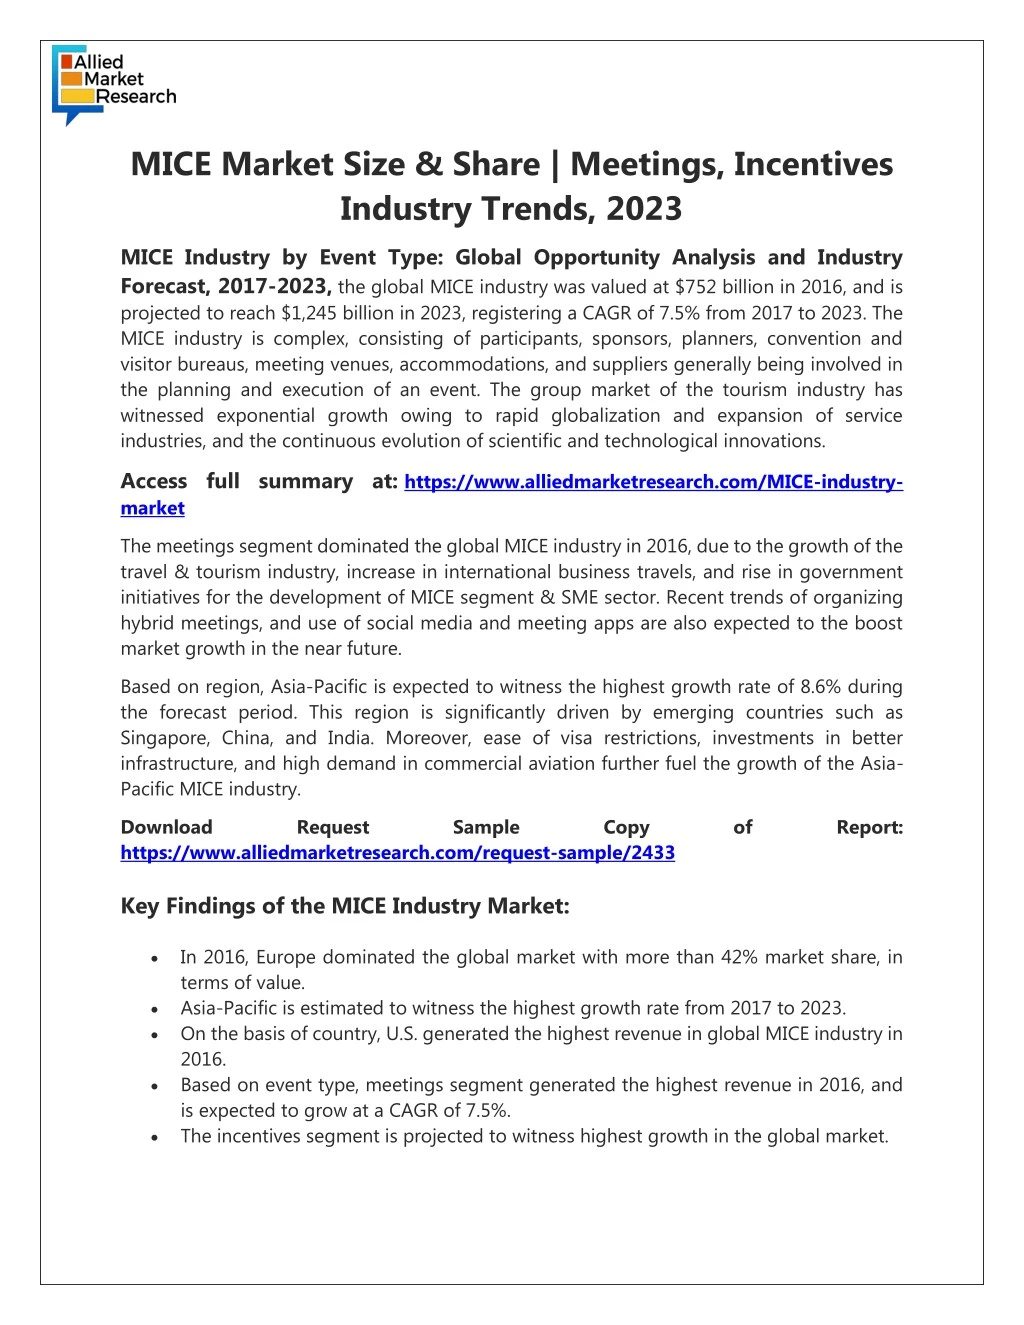 mice market size share meetings incentives